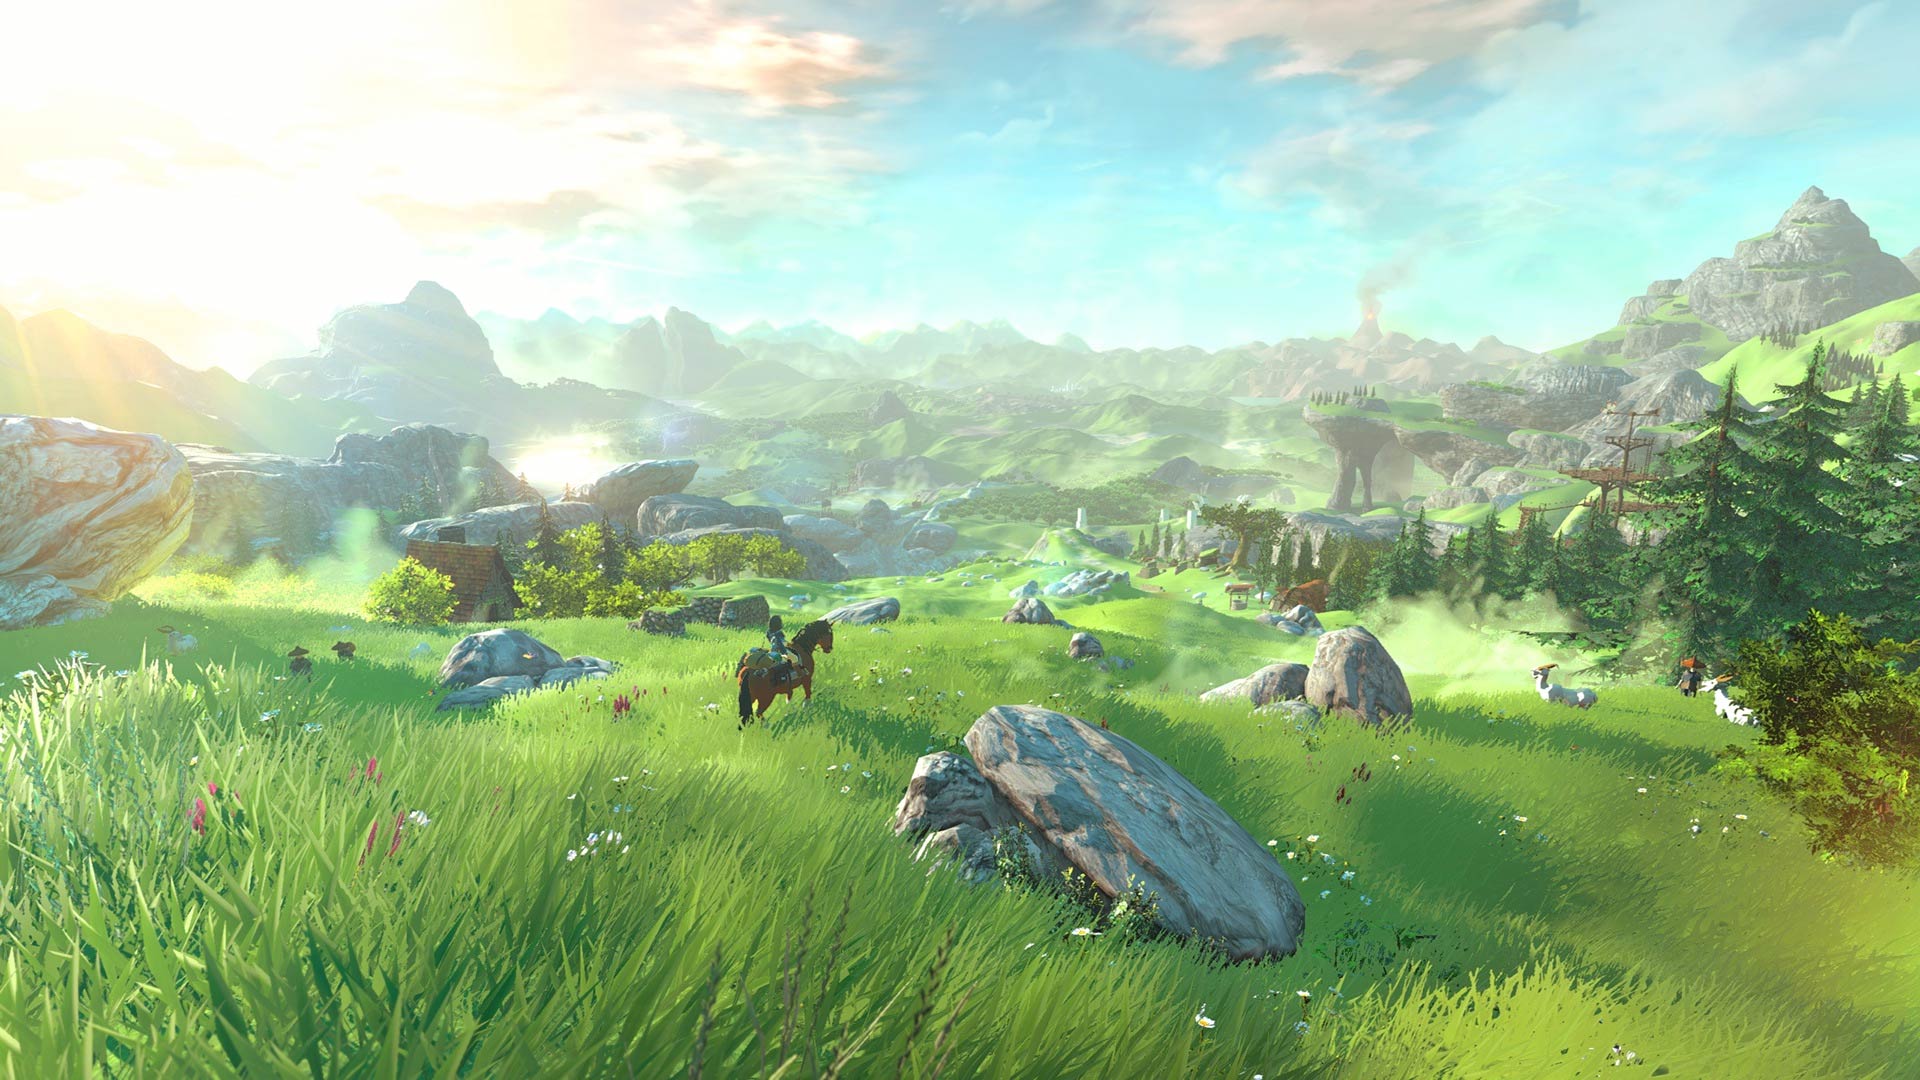 The Legend of Zelda is My Most Anticipated E3 Game